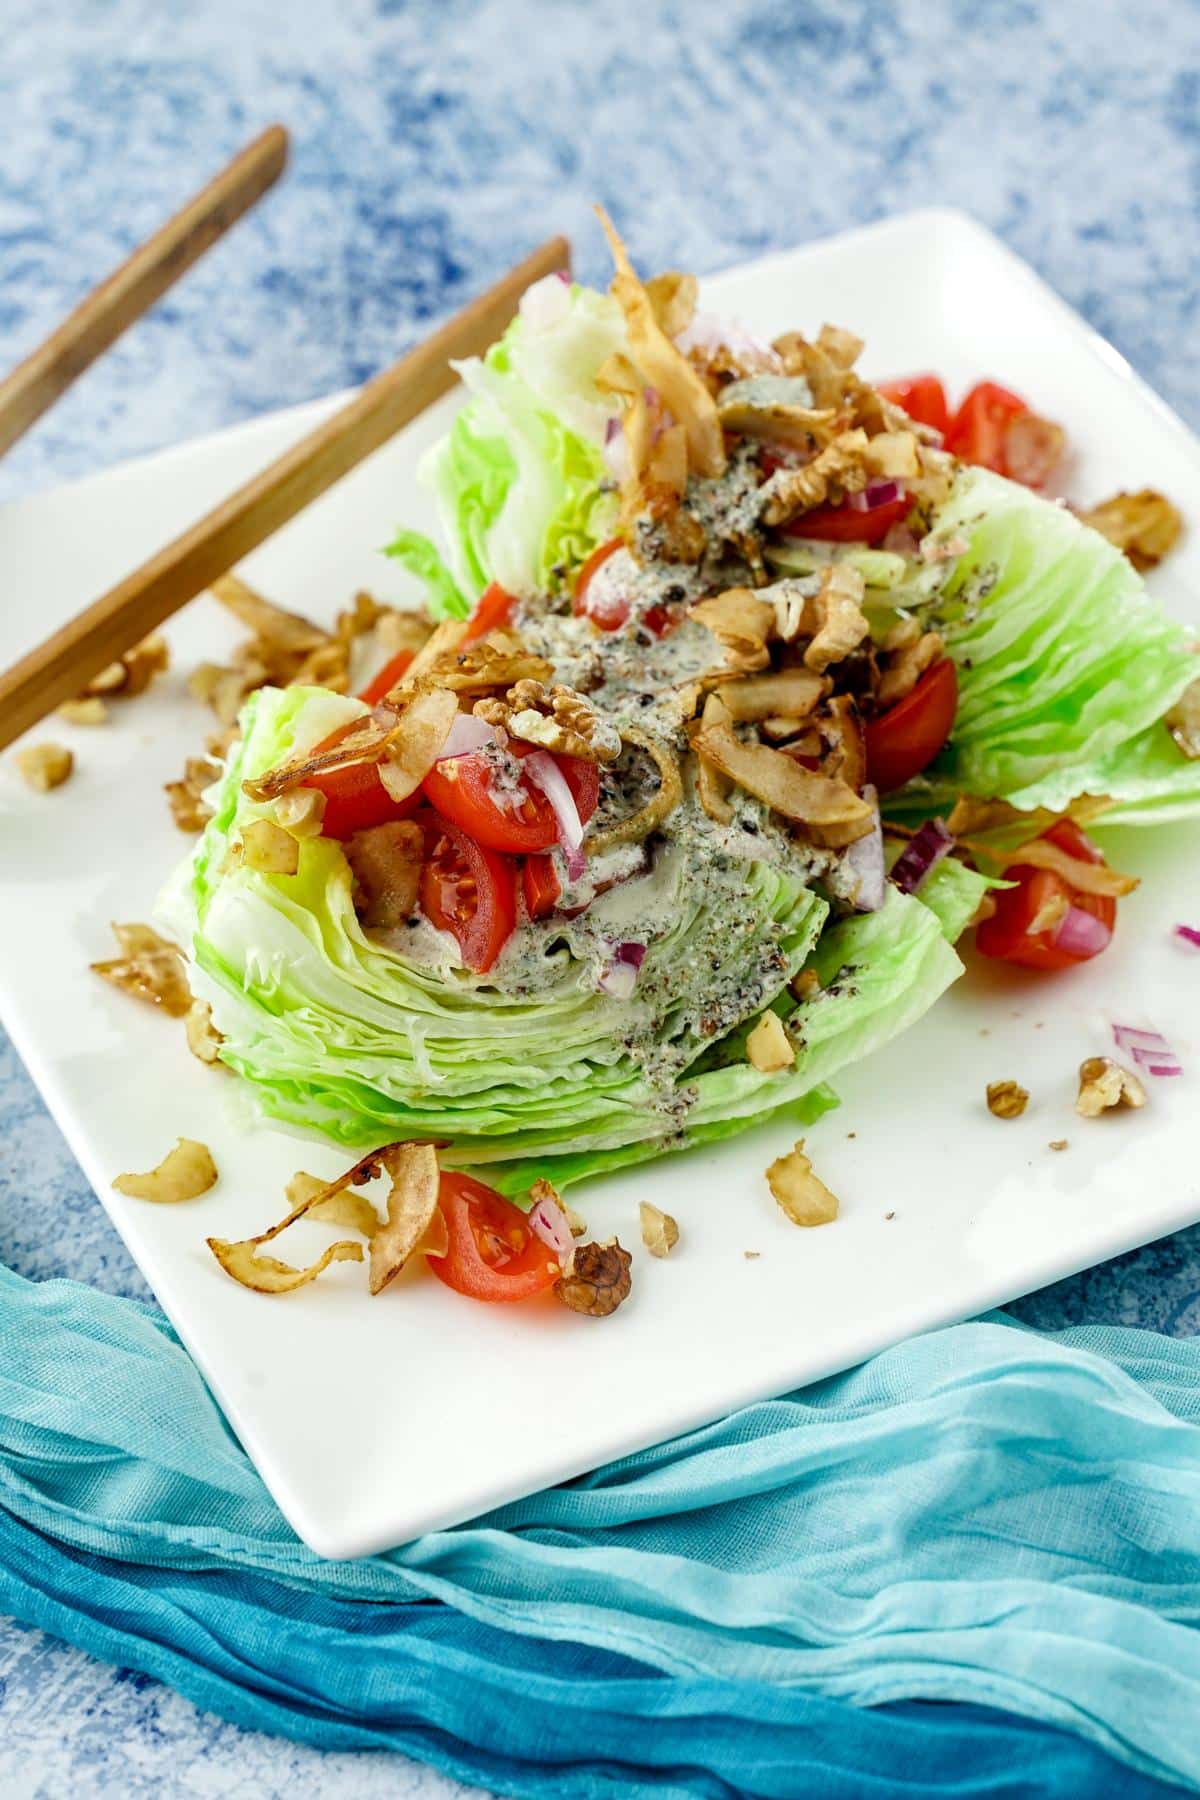 white plate holding wedge salad with tomato and coconut bacon on top sitting on teal napkin